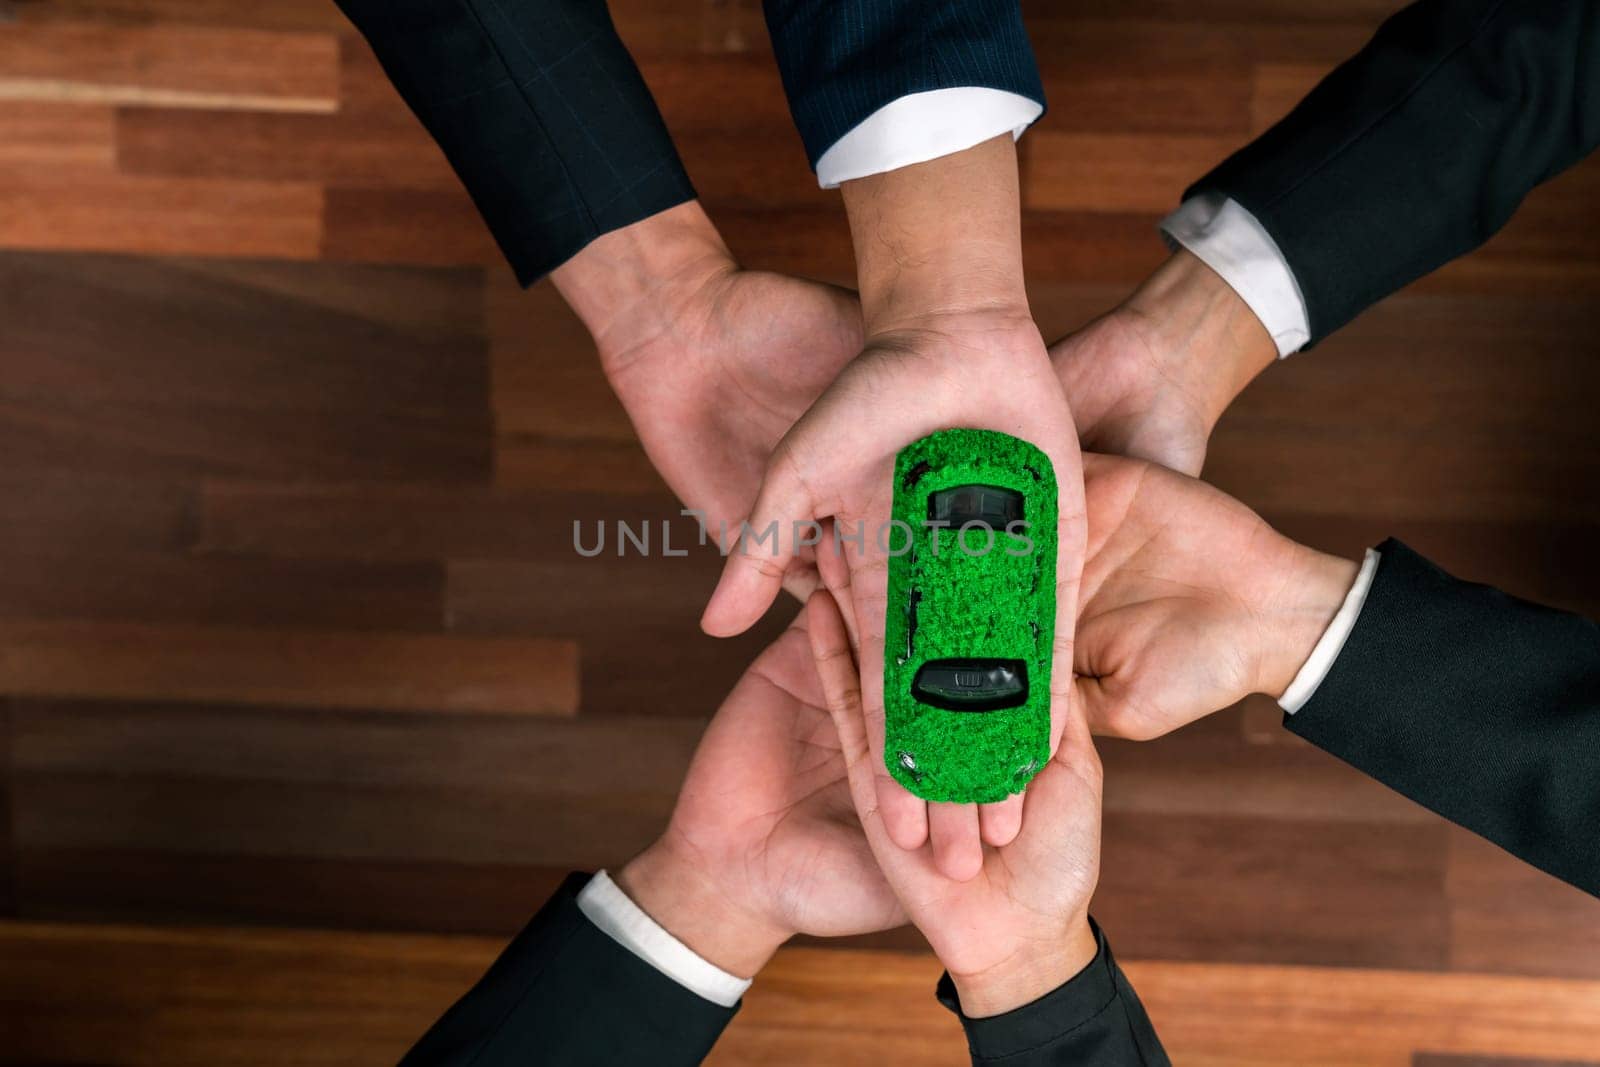 Top view business people holding EV car model as business synergy partnership unite and take action to utilized eco-transportation to reduce CO2 emission for sustainable and greener future. Quaint